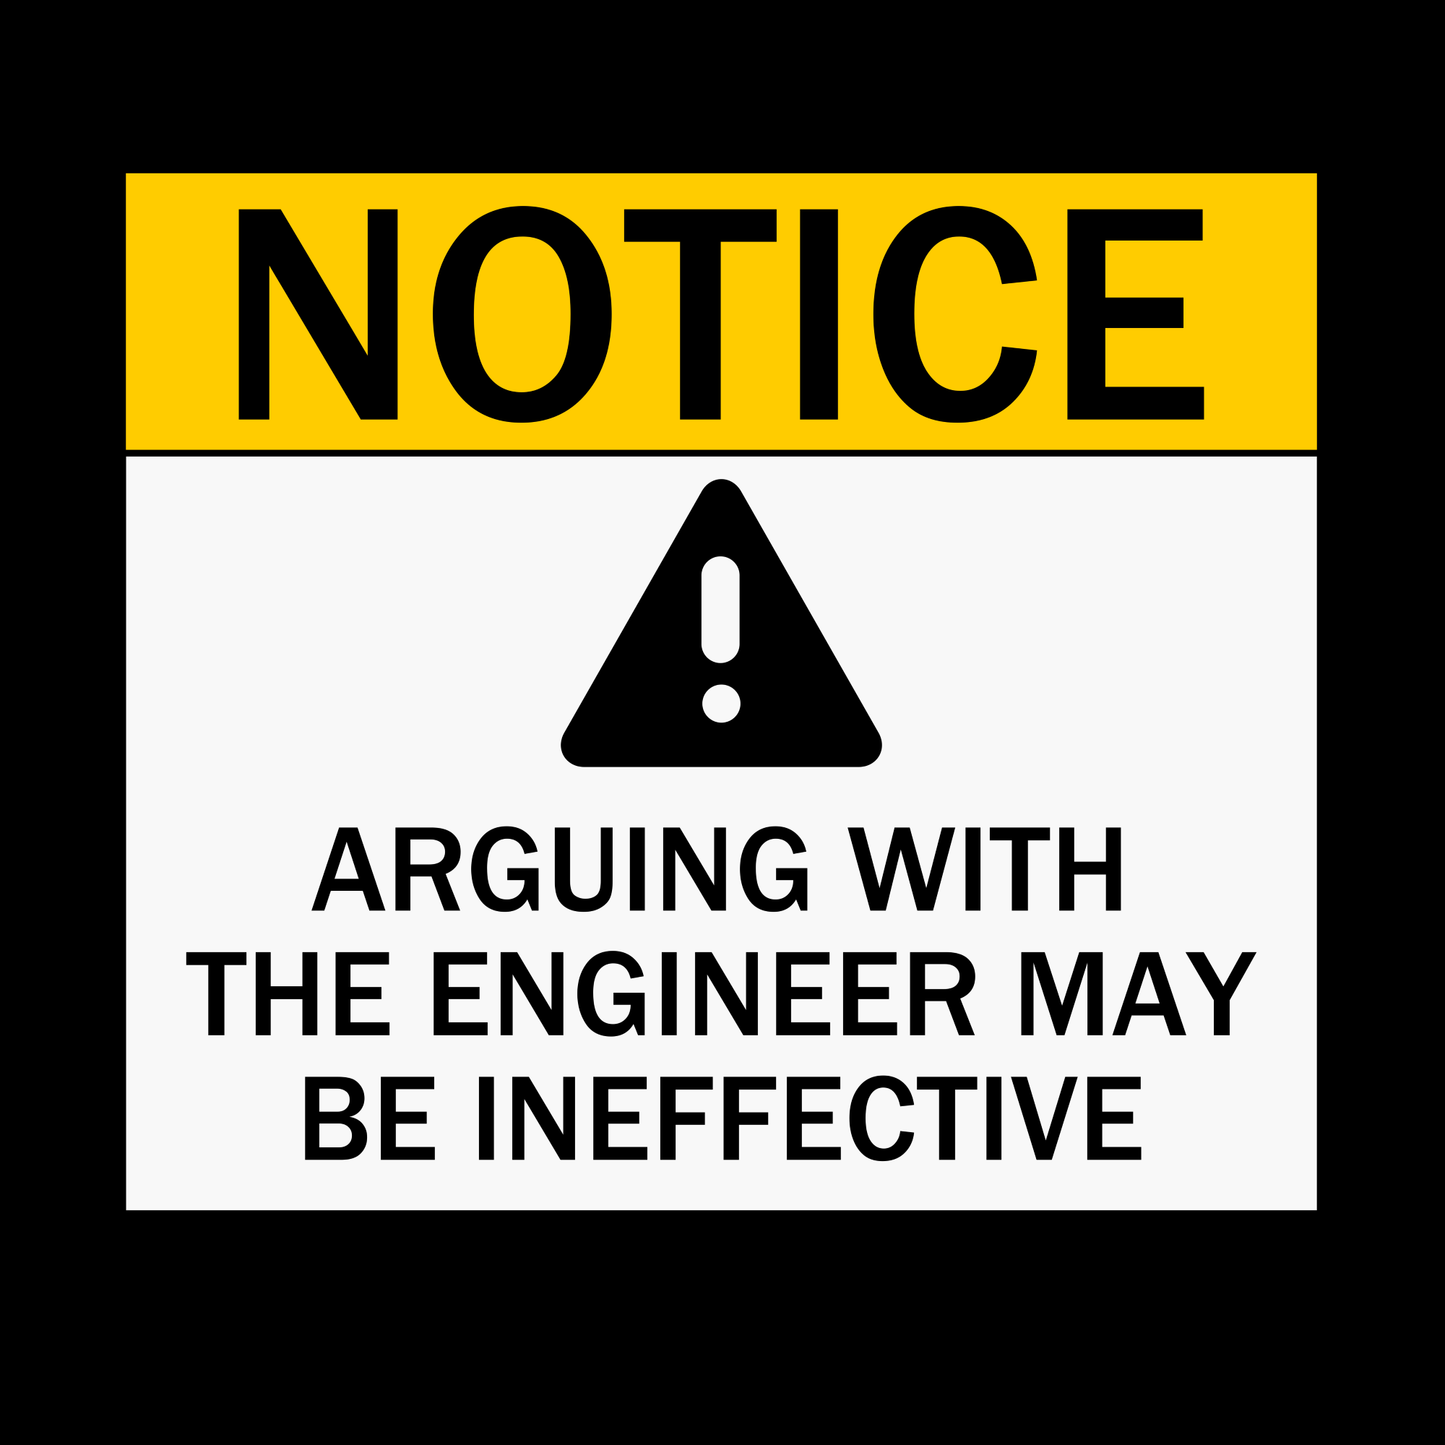 Notice - Arguing With The Engineer May Be Ineffective